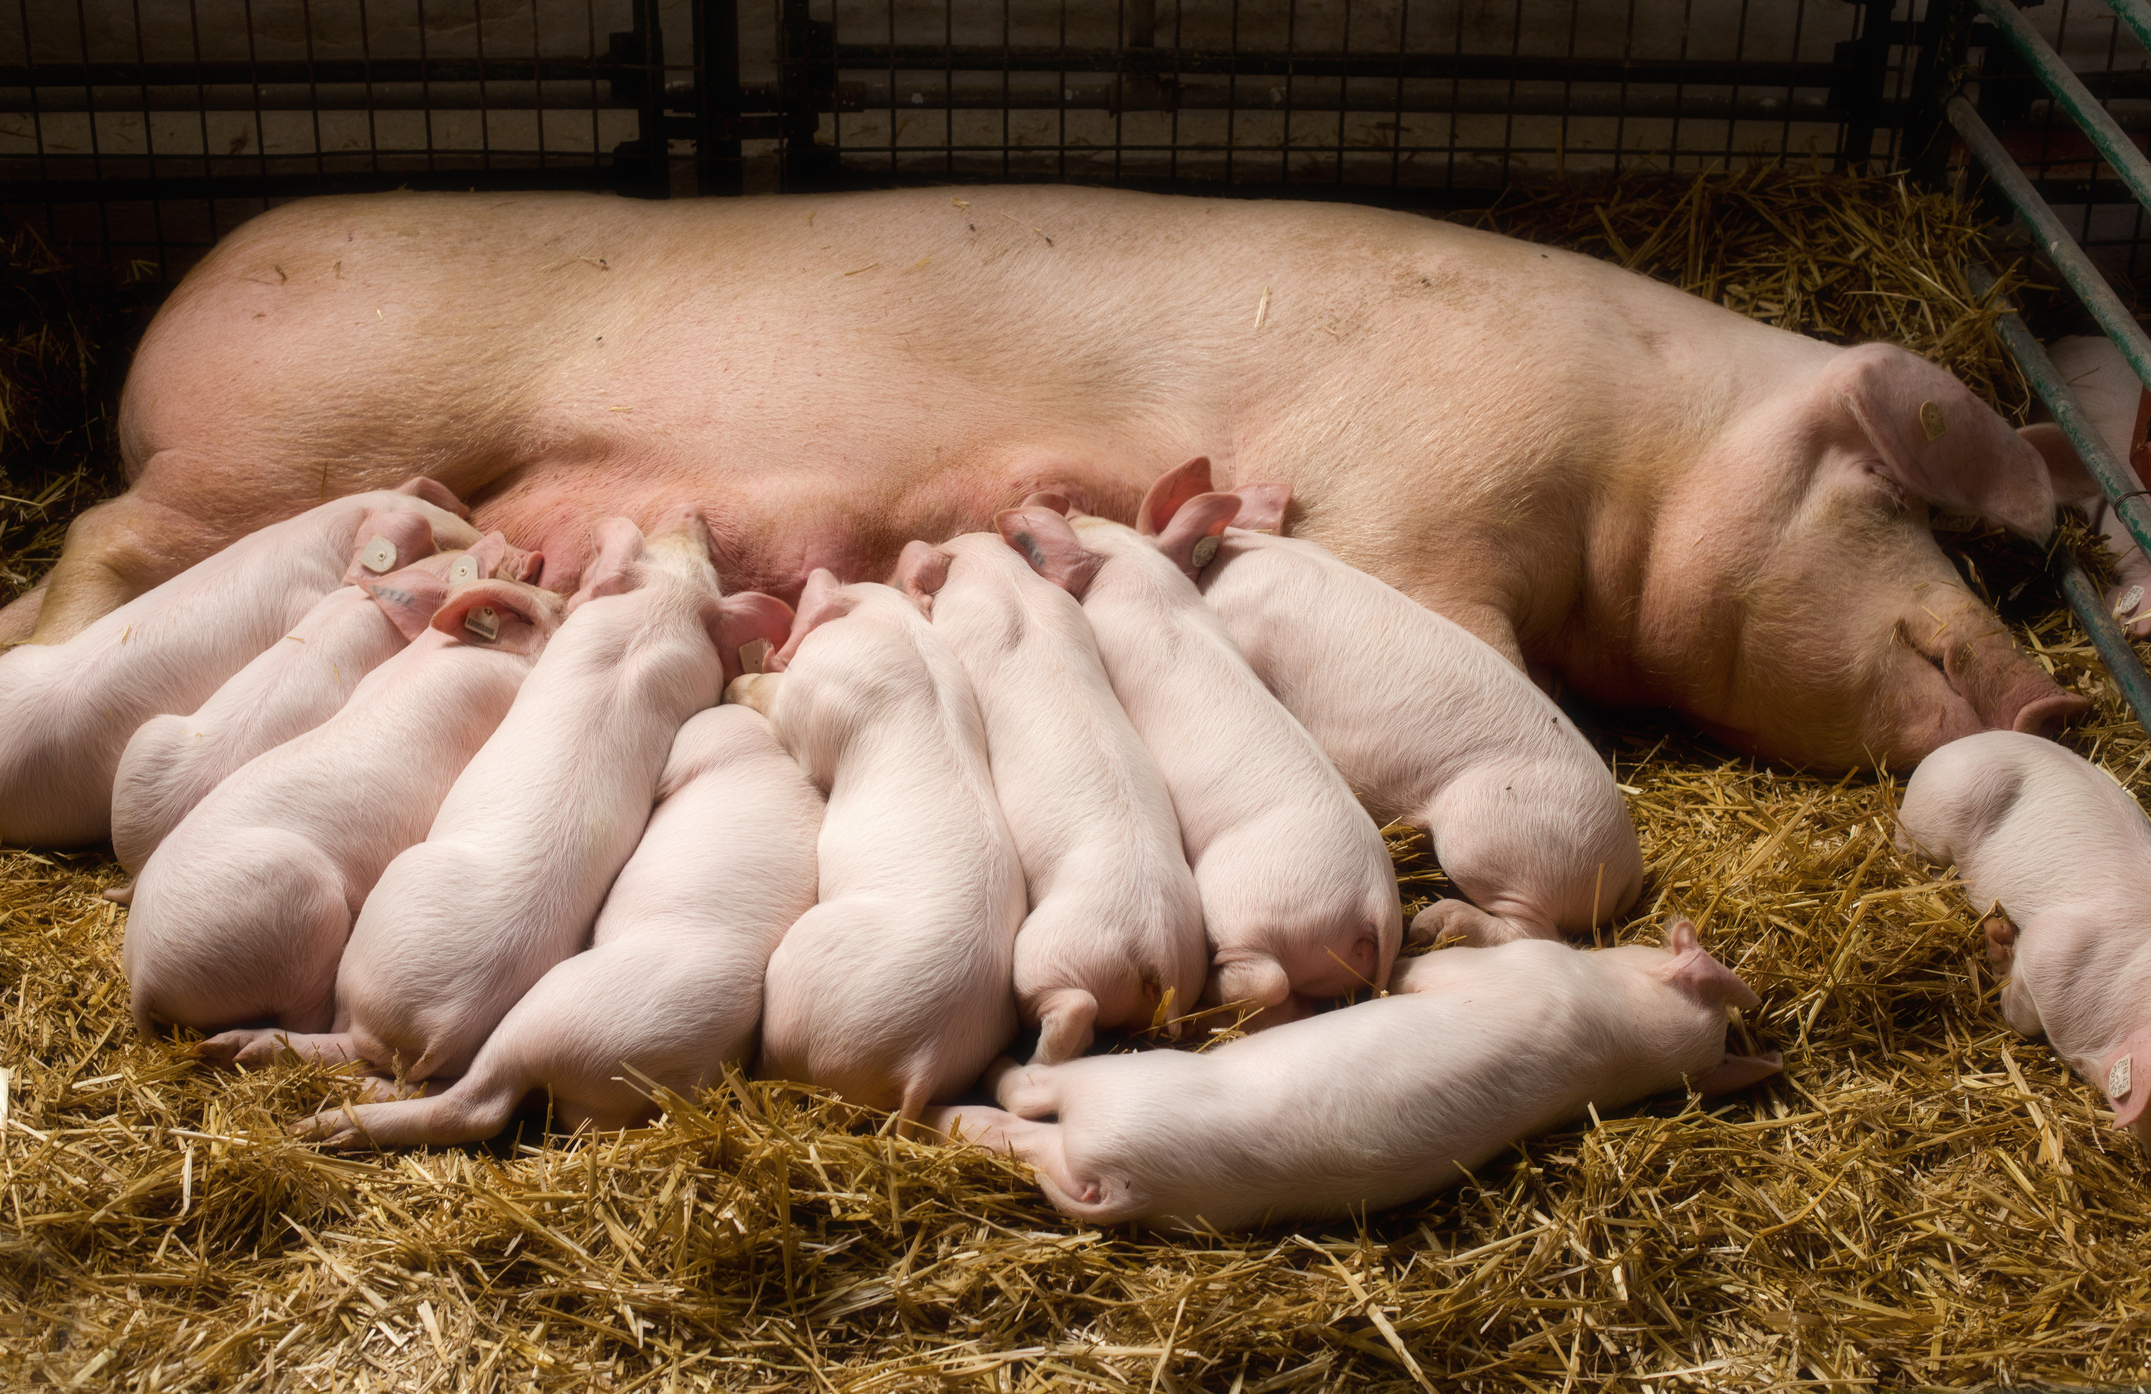 Pig producers are not benefitting from the global rise in prices